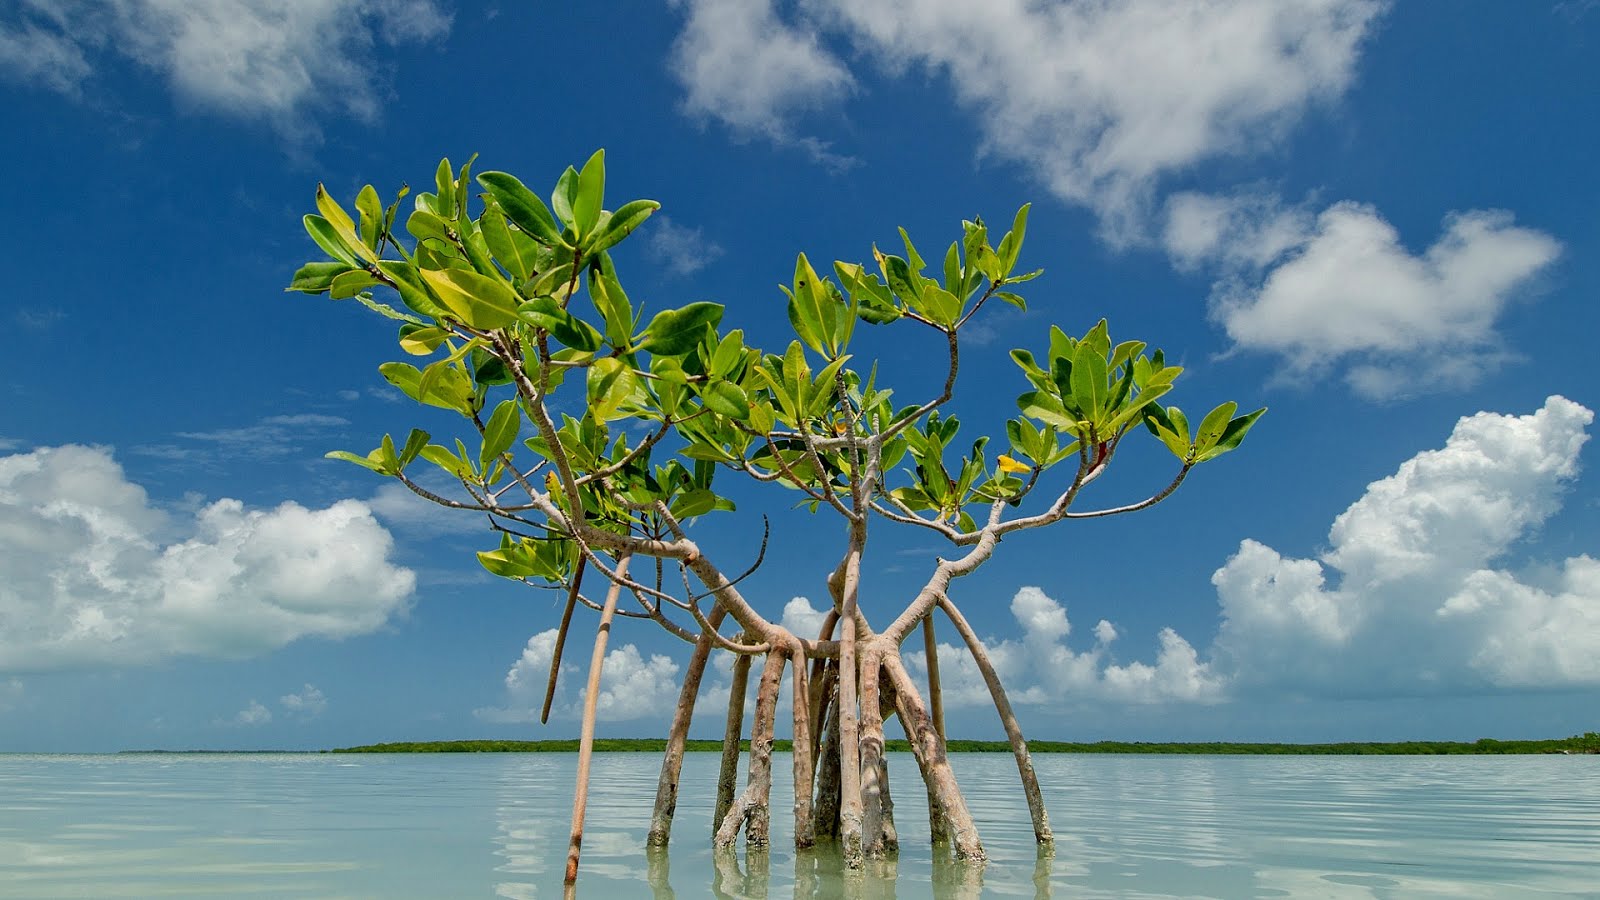 Marine Biome - Plants of The Mangroves